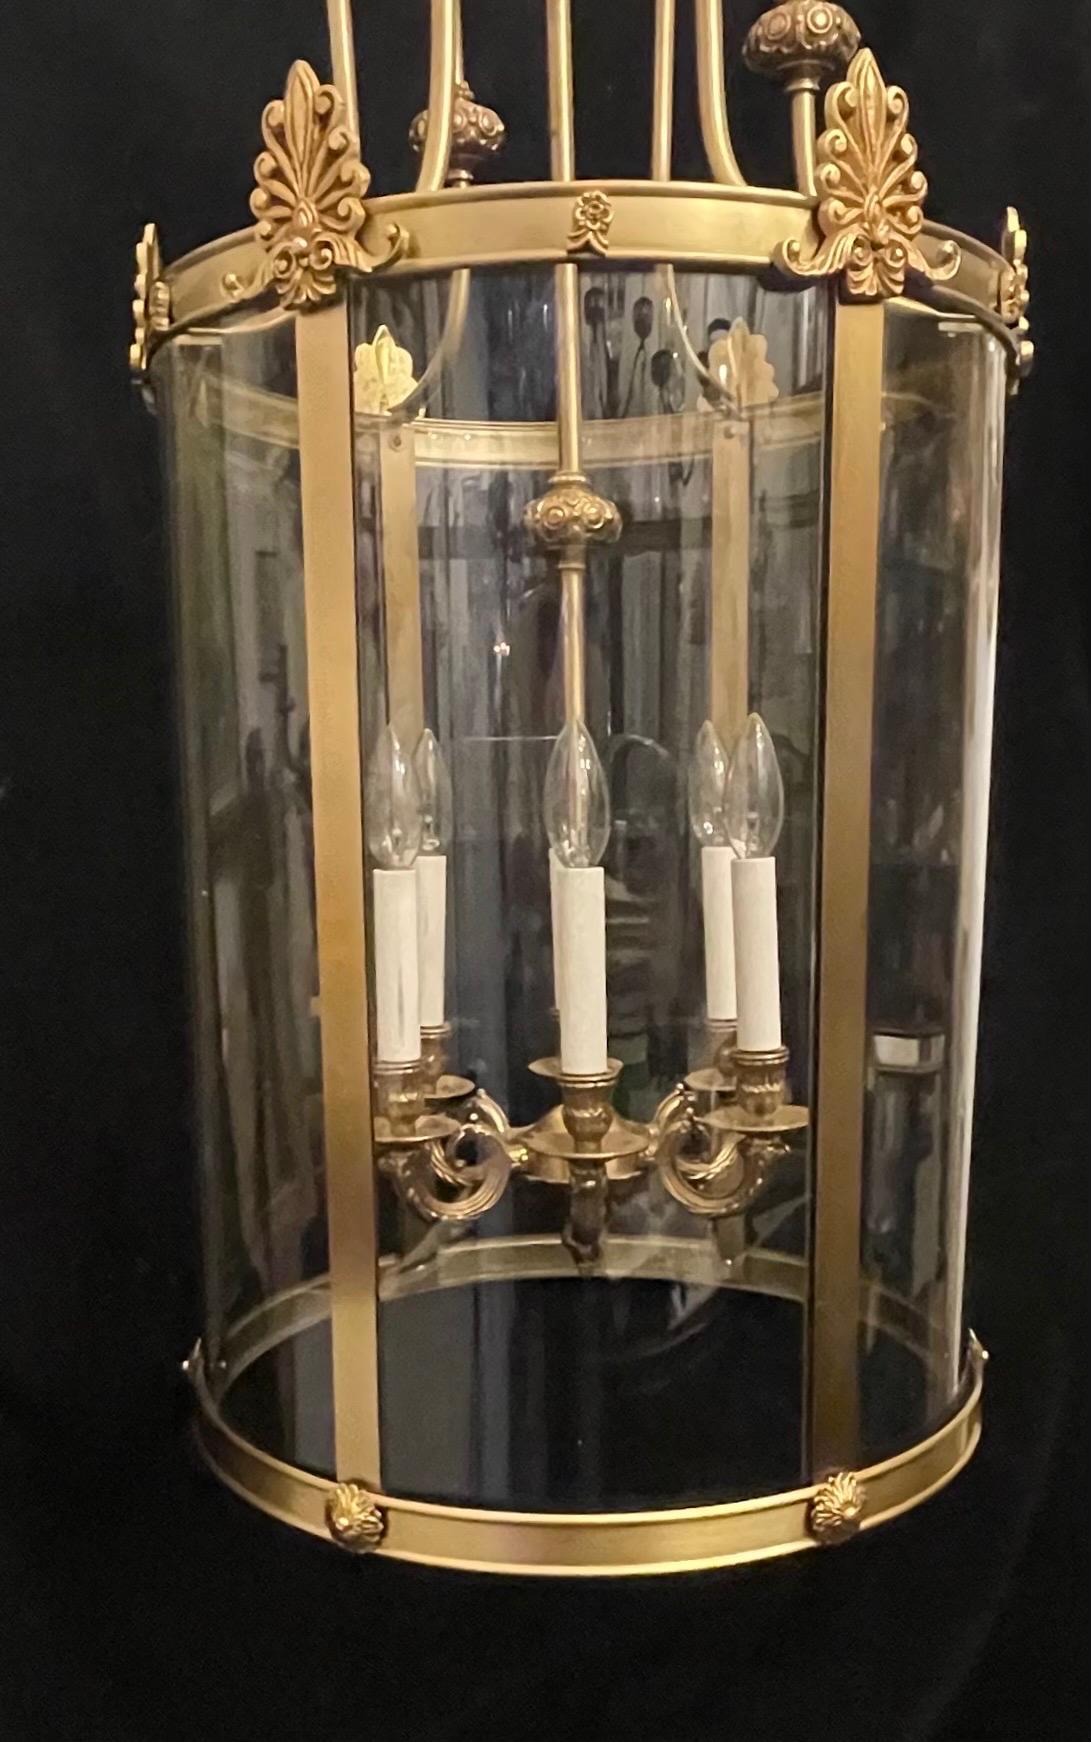 Wonderful Large French Bronze Regency Empire Curved Glass Panel Lantern Fixture In Good Condition For Sale In Roslyn, NY